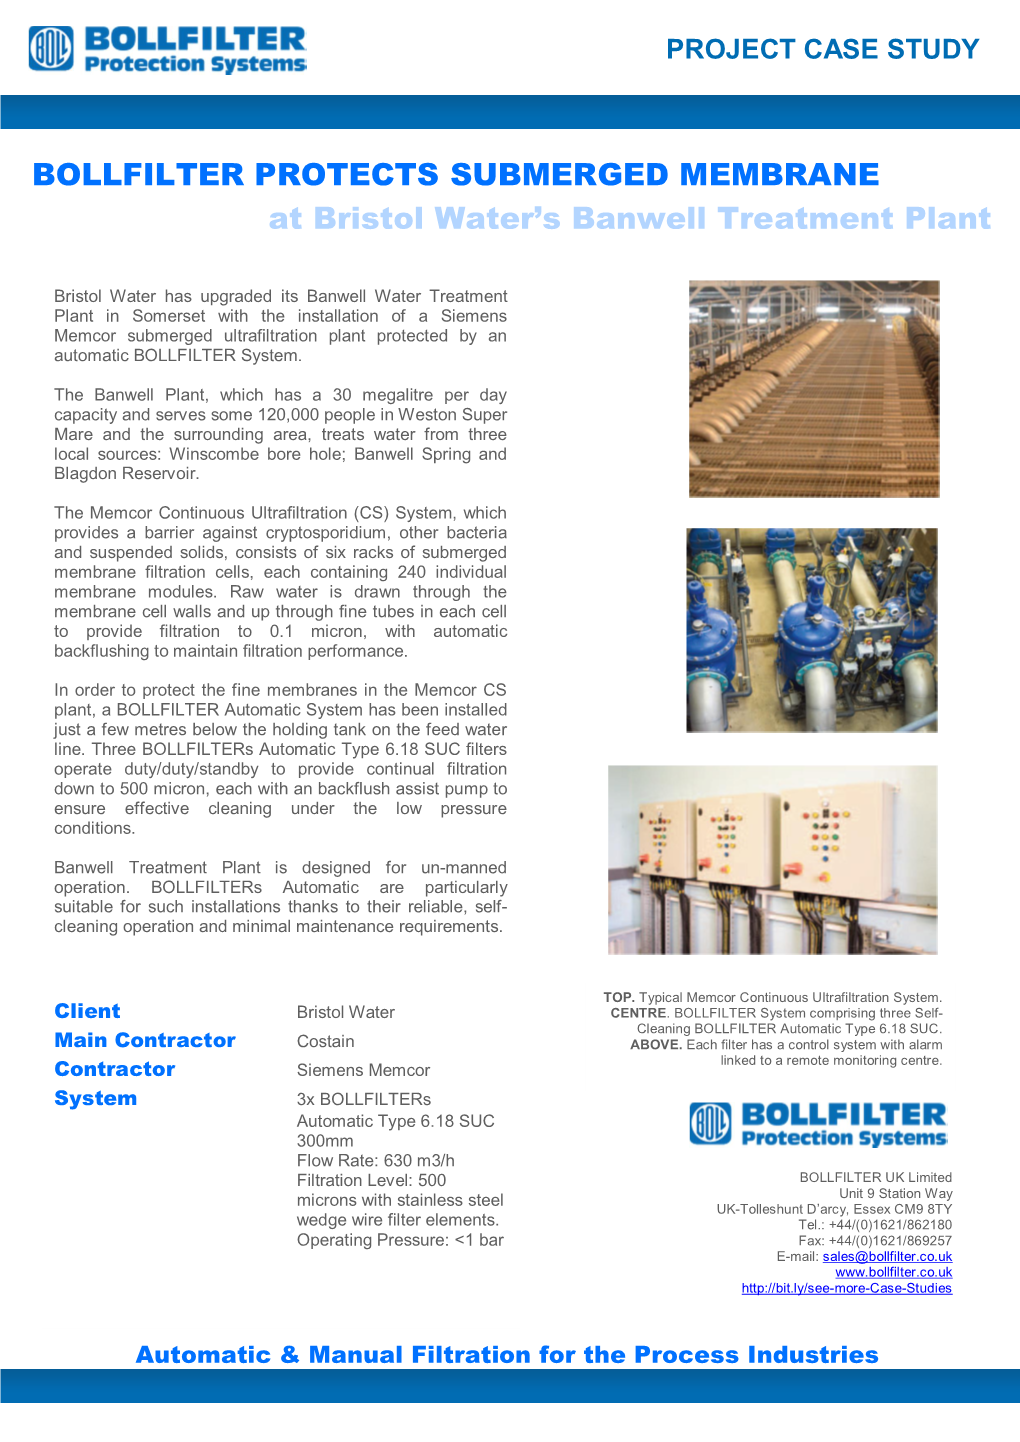 BOLLFILTER PROTECTS SUBMERGED MEMBRANE at Bristol Water’S Banwell Treatment Plant